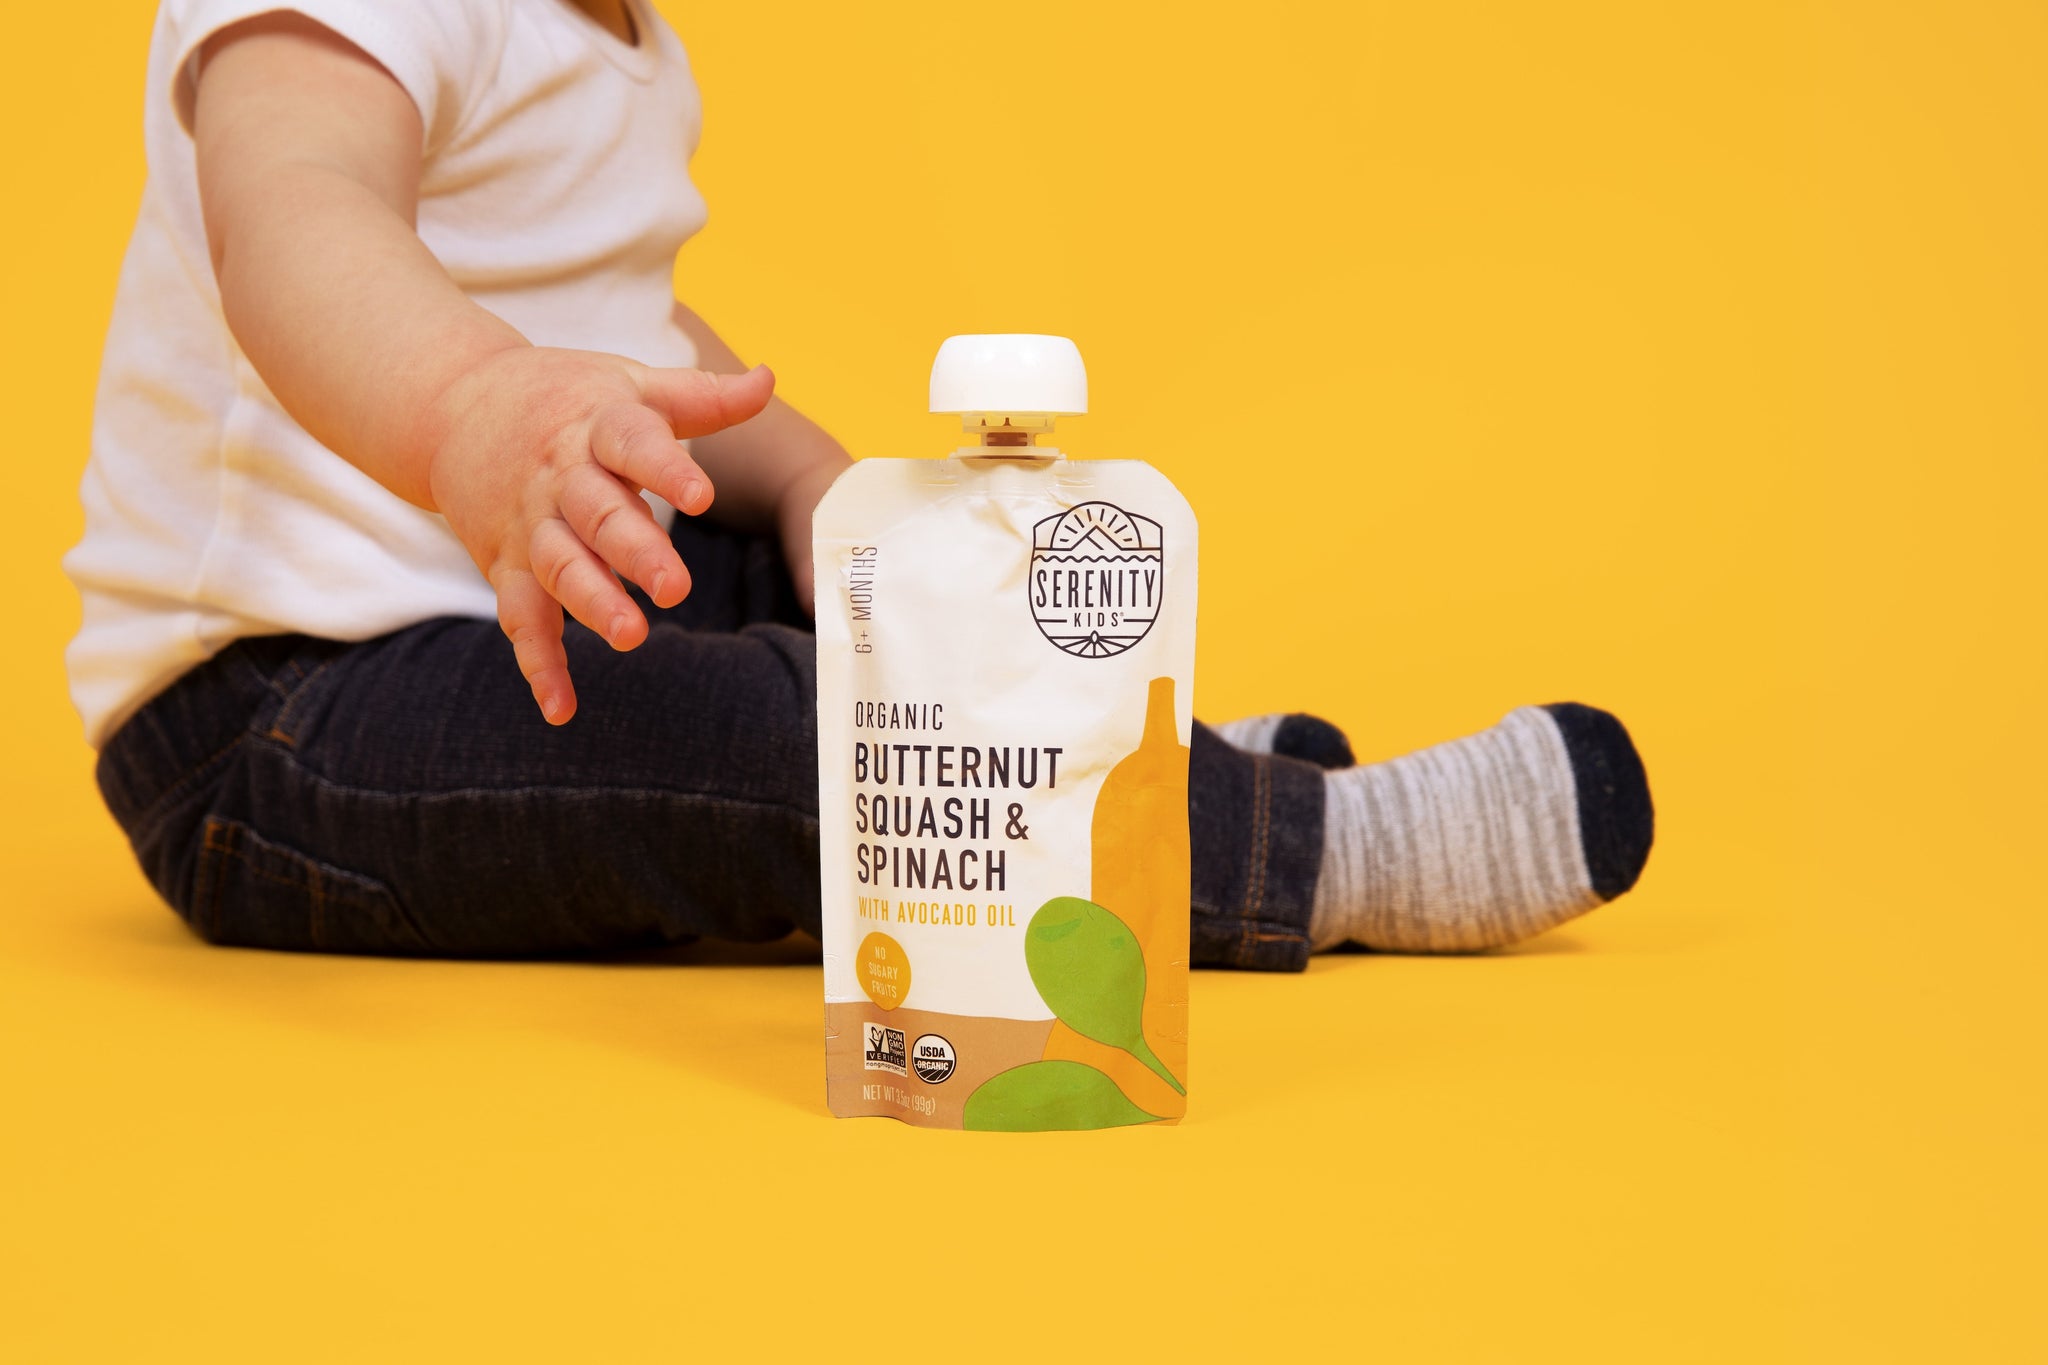 Serenity Kids Remains Committed to Reducing Heavy Metals in Baby Food